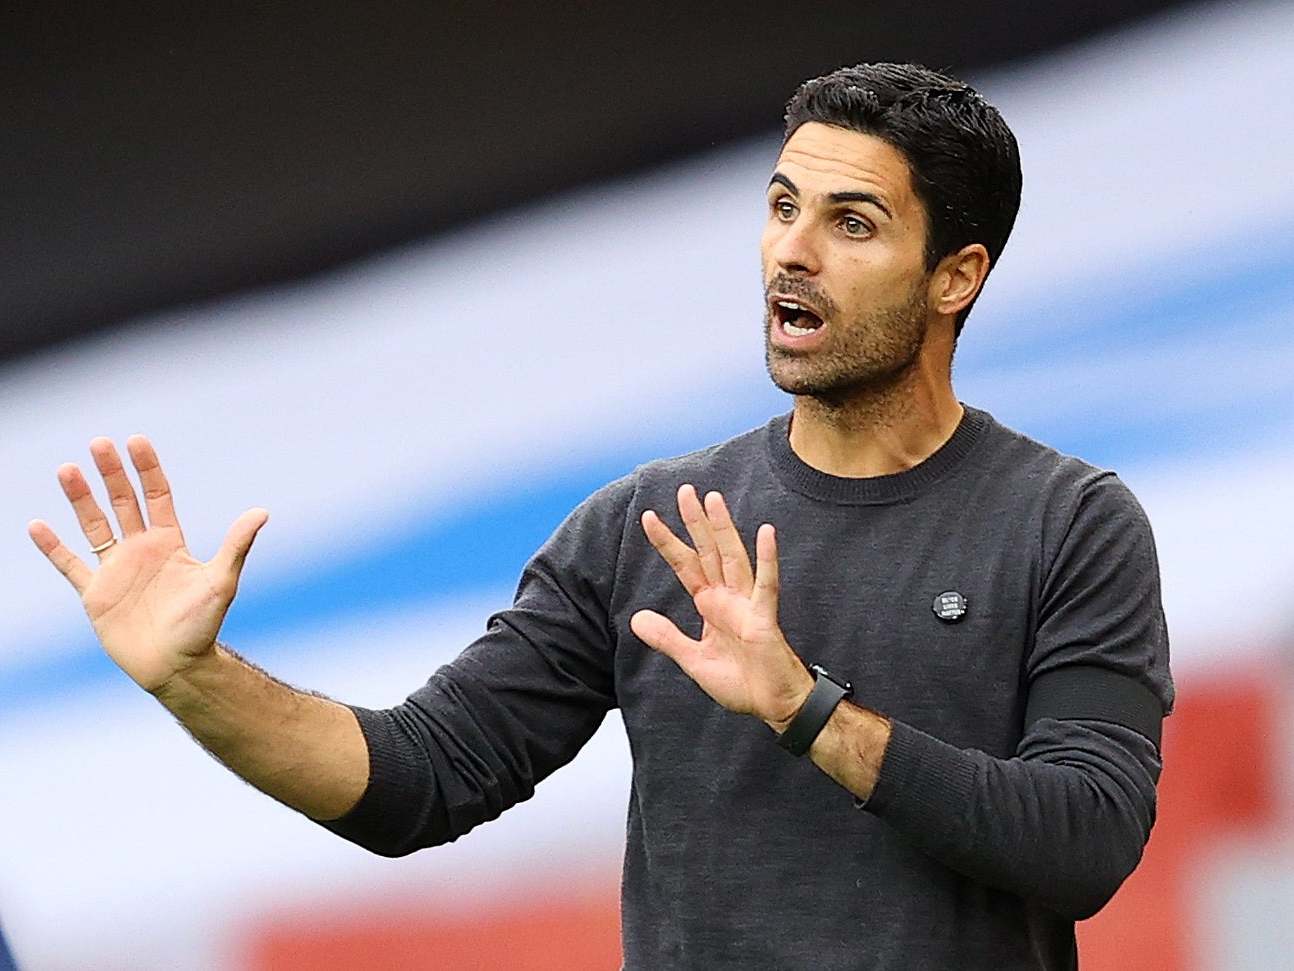 Arteta admitted the image doesn't look good when finances are taken into account